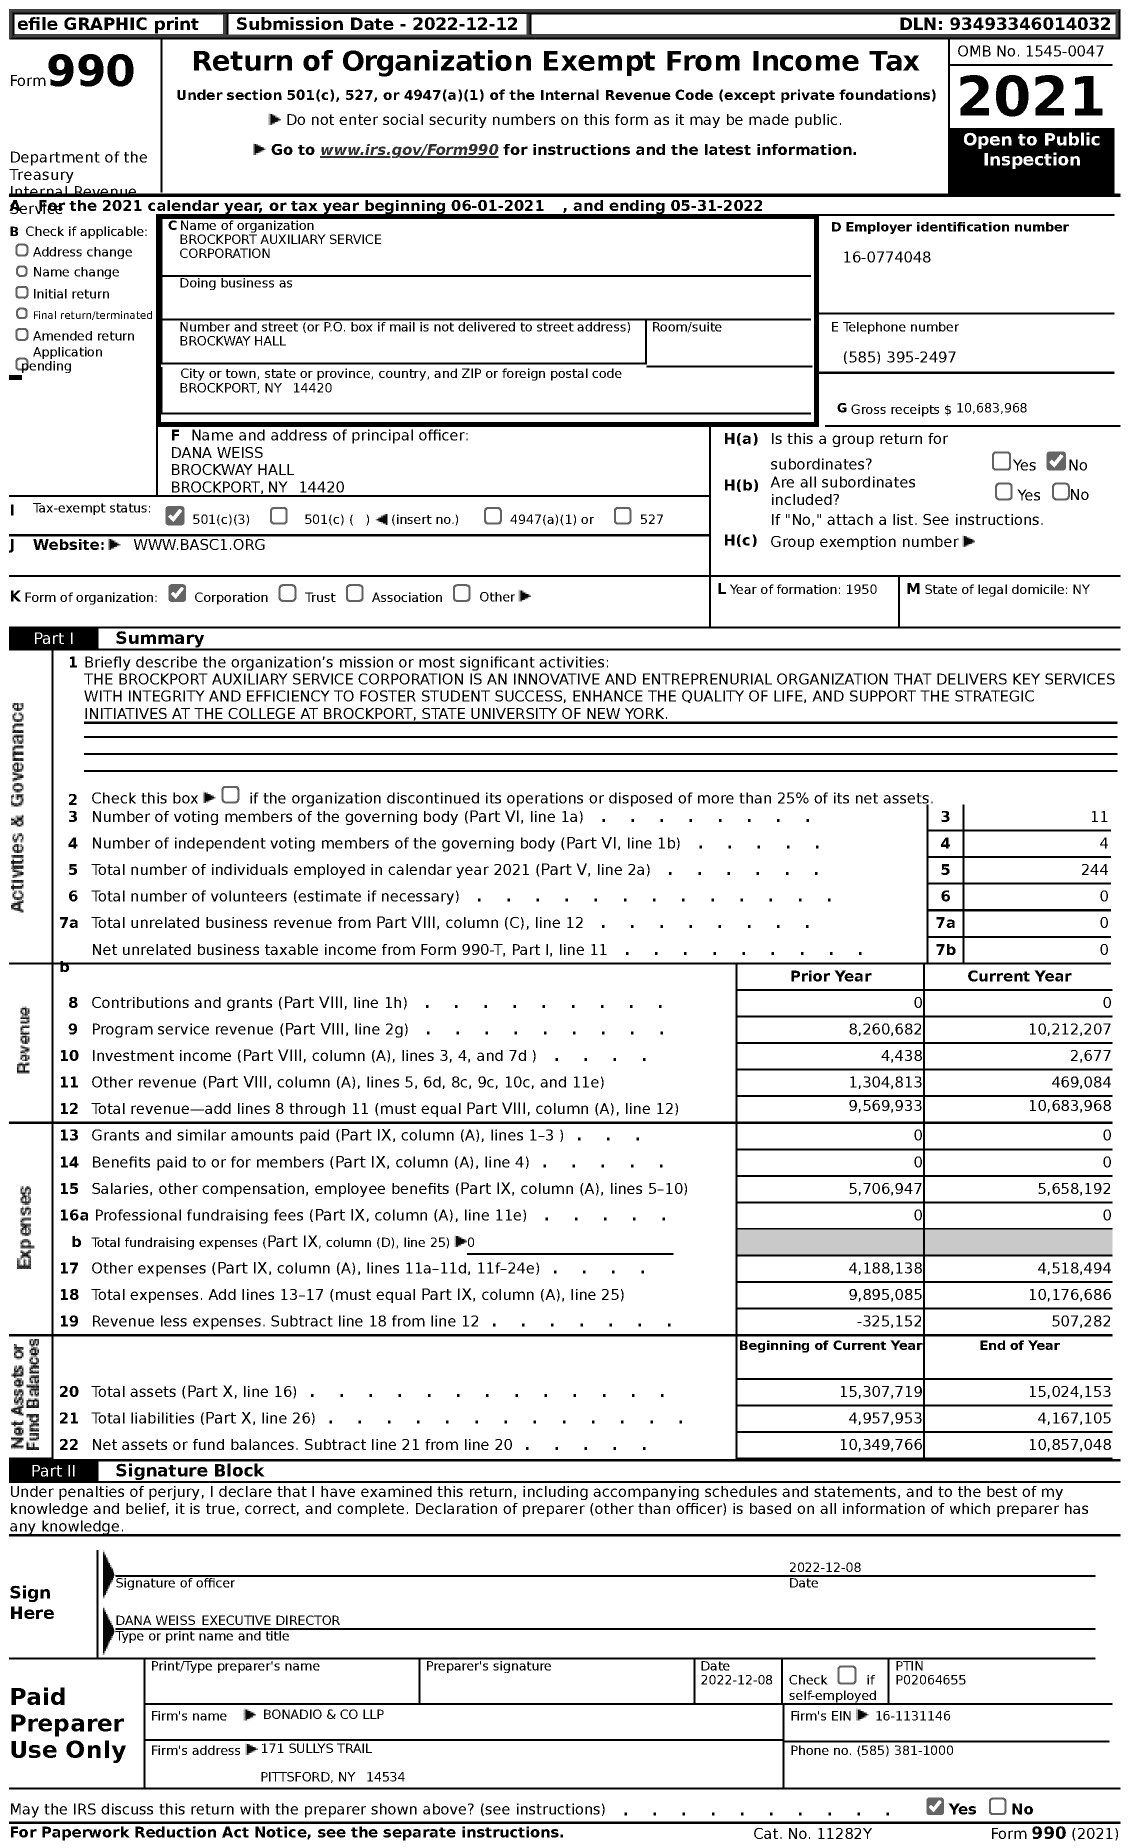 Image of first page of 2021 Form 990 for Brockport Auxilary Service Corporation (BASC)